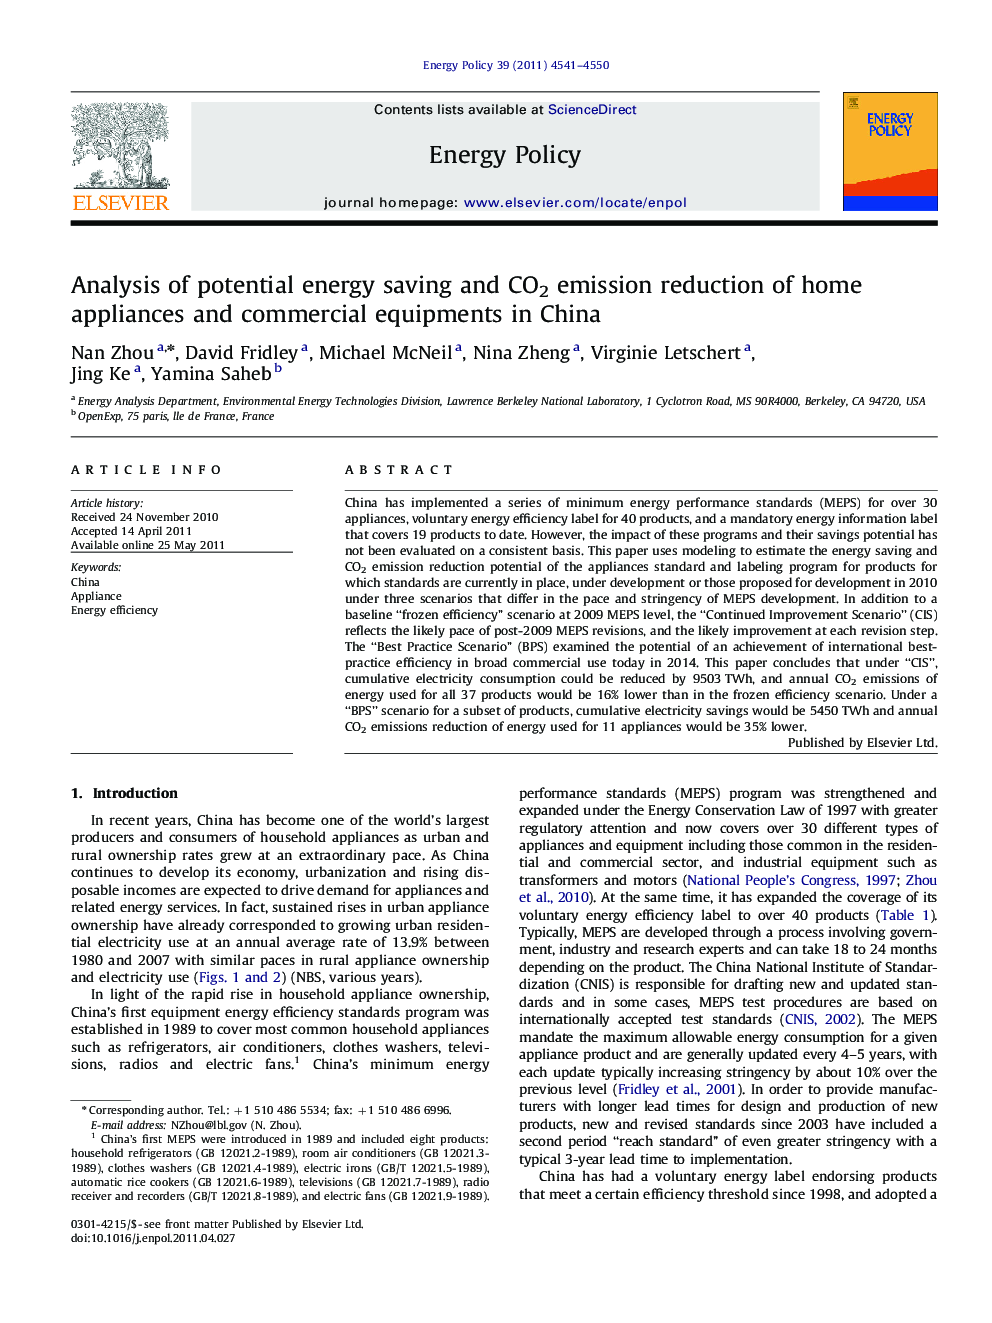 Analysis of potential energy saving and CO2 emission reduction of home appliances and commercial equipments in China